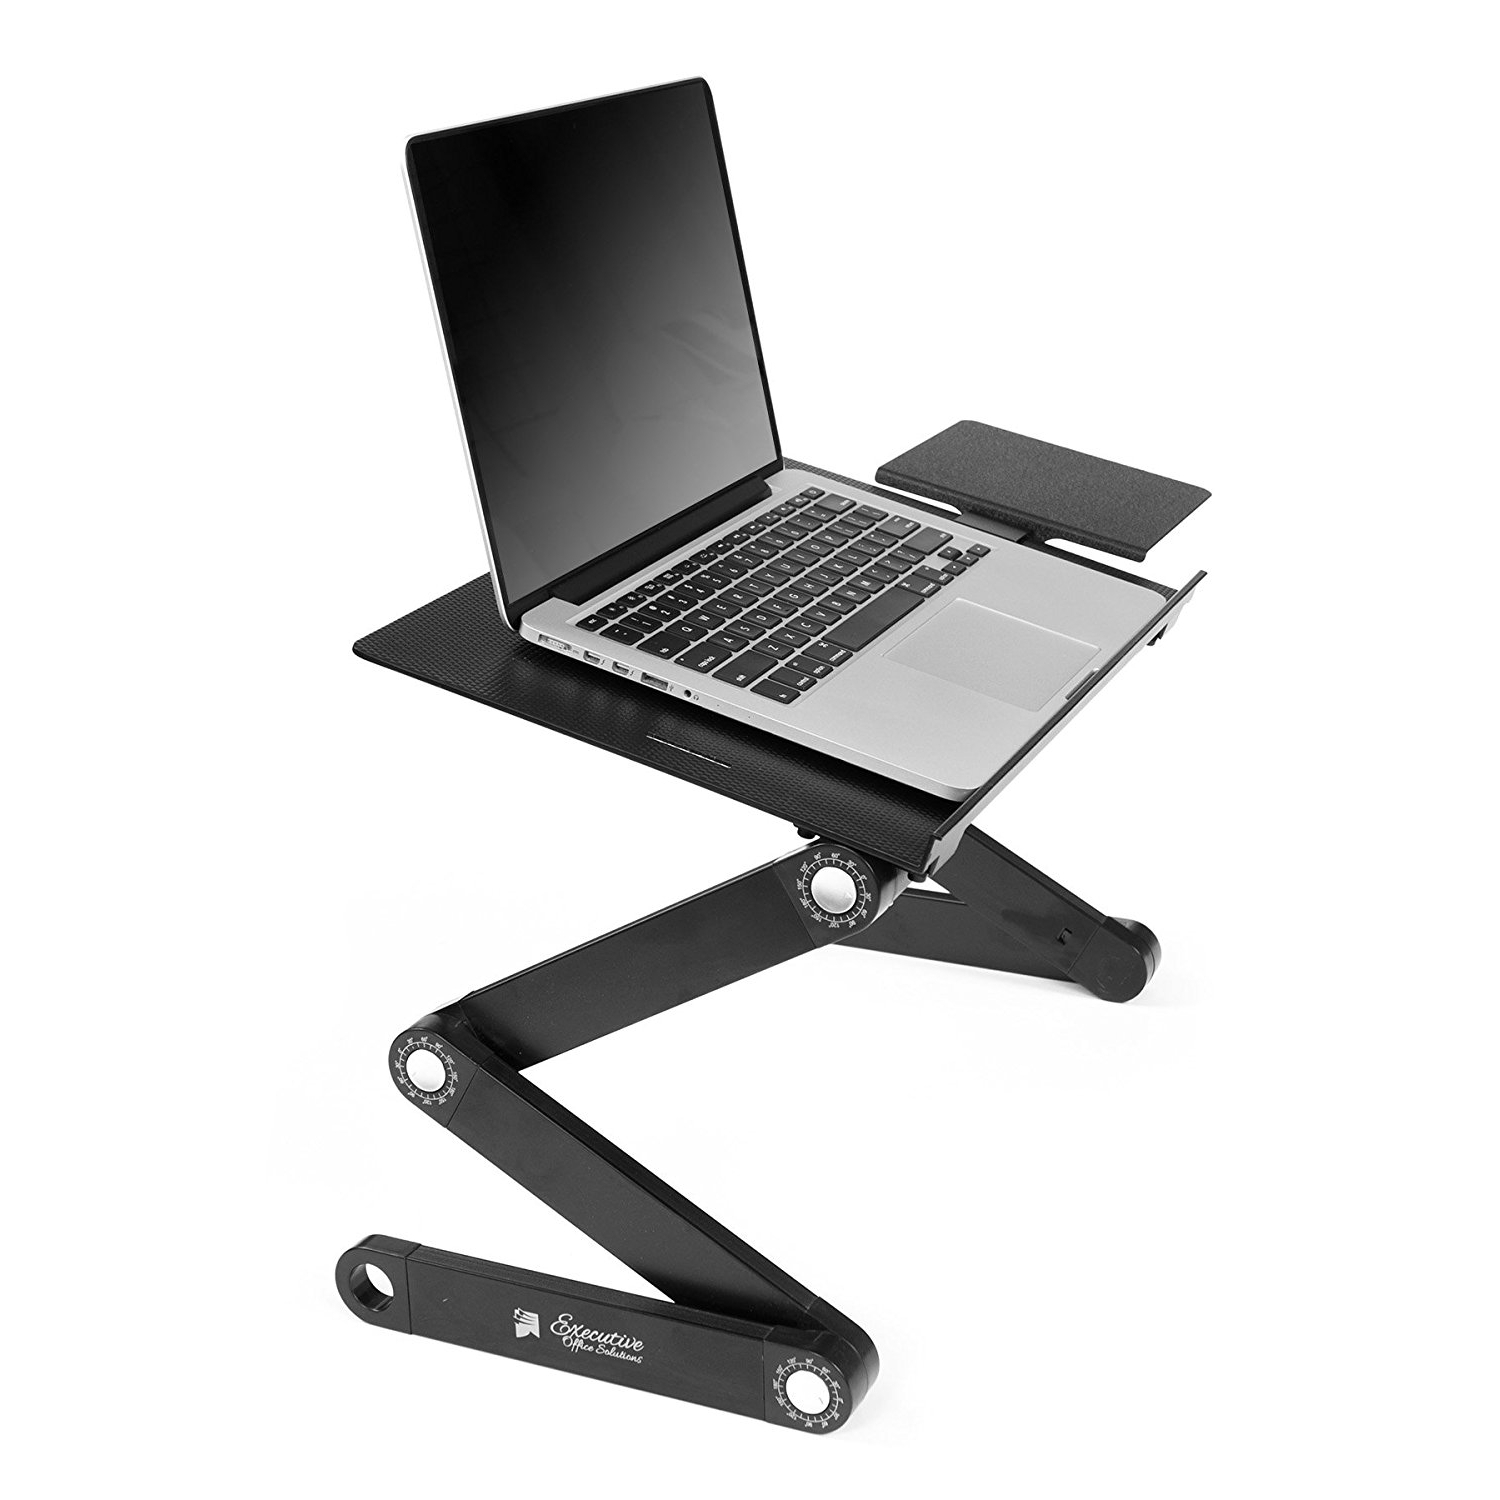 Laptop Stand Holder Built-in Foldable Legs with Heat-Vent for Laptop Adjustable Height Laptop Riser YYDD Size : Big